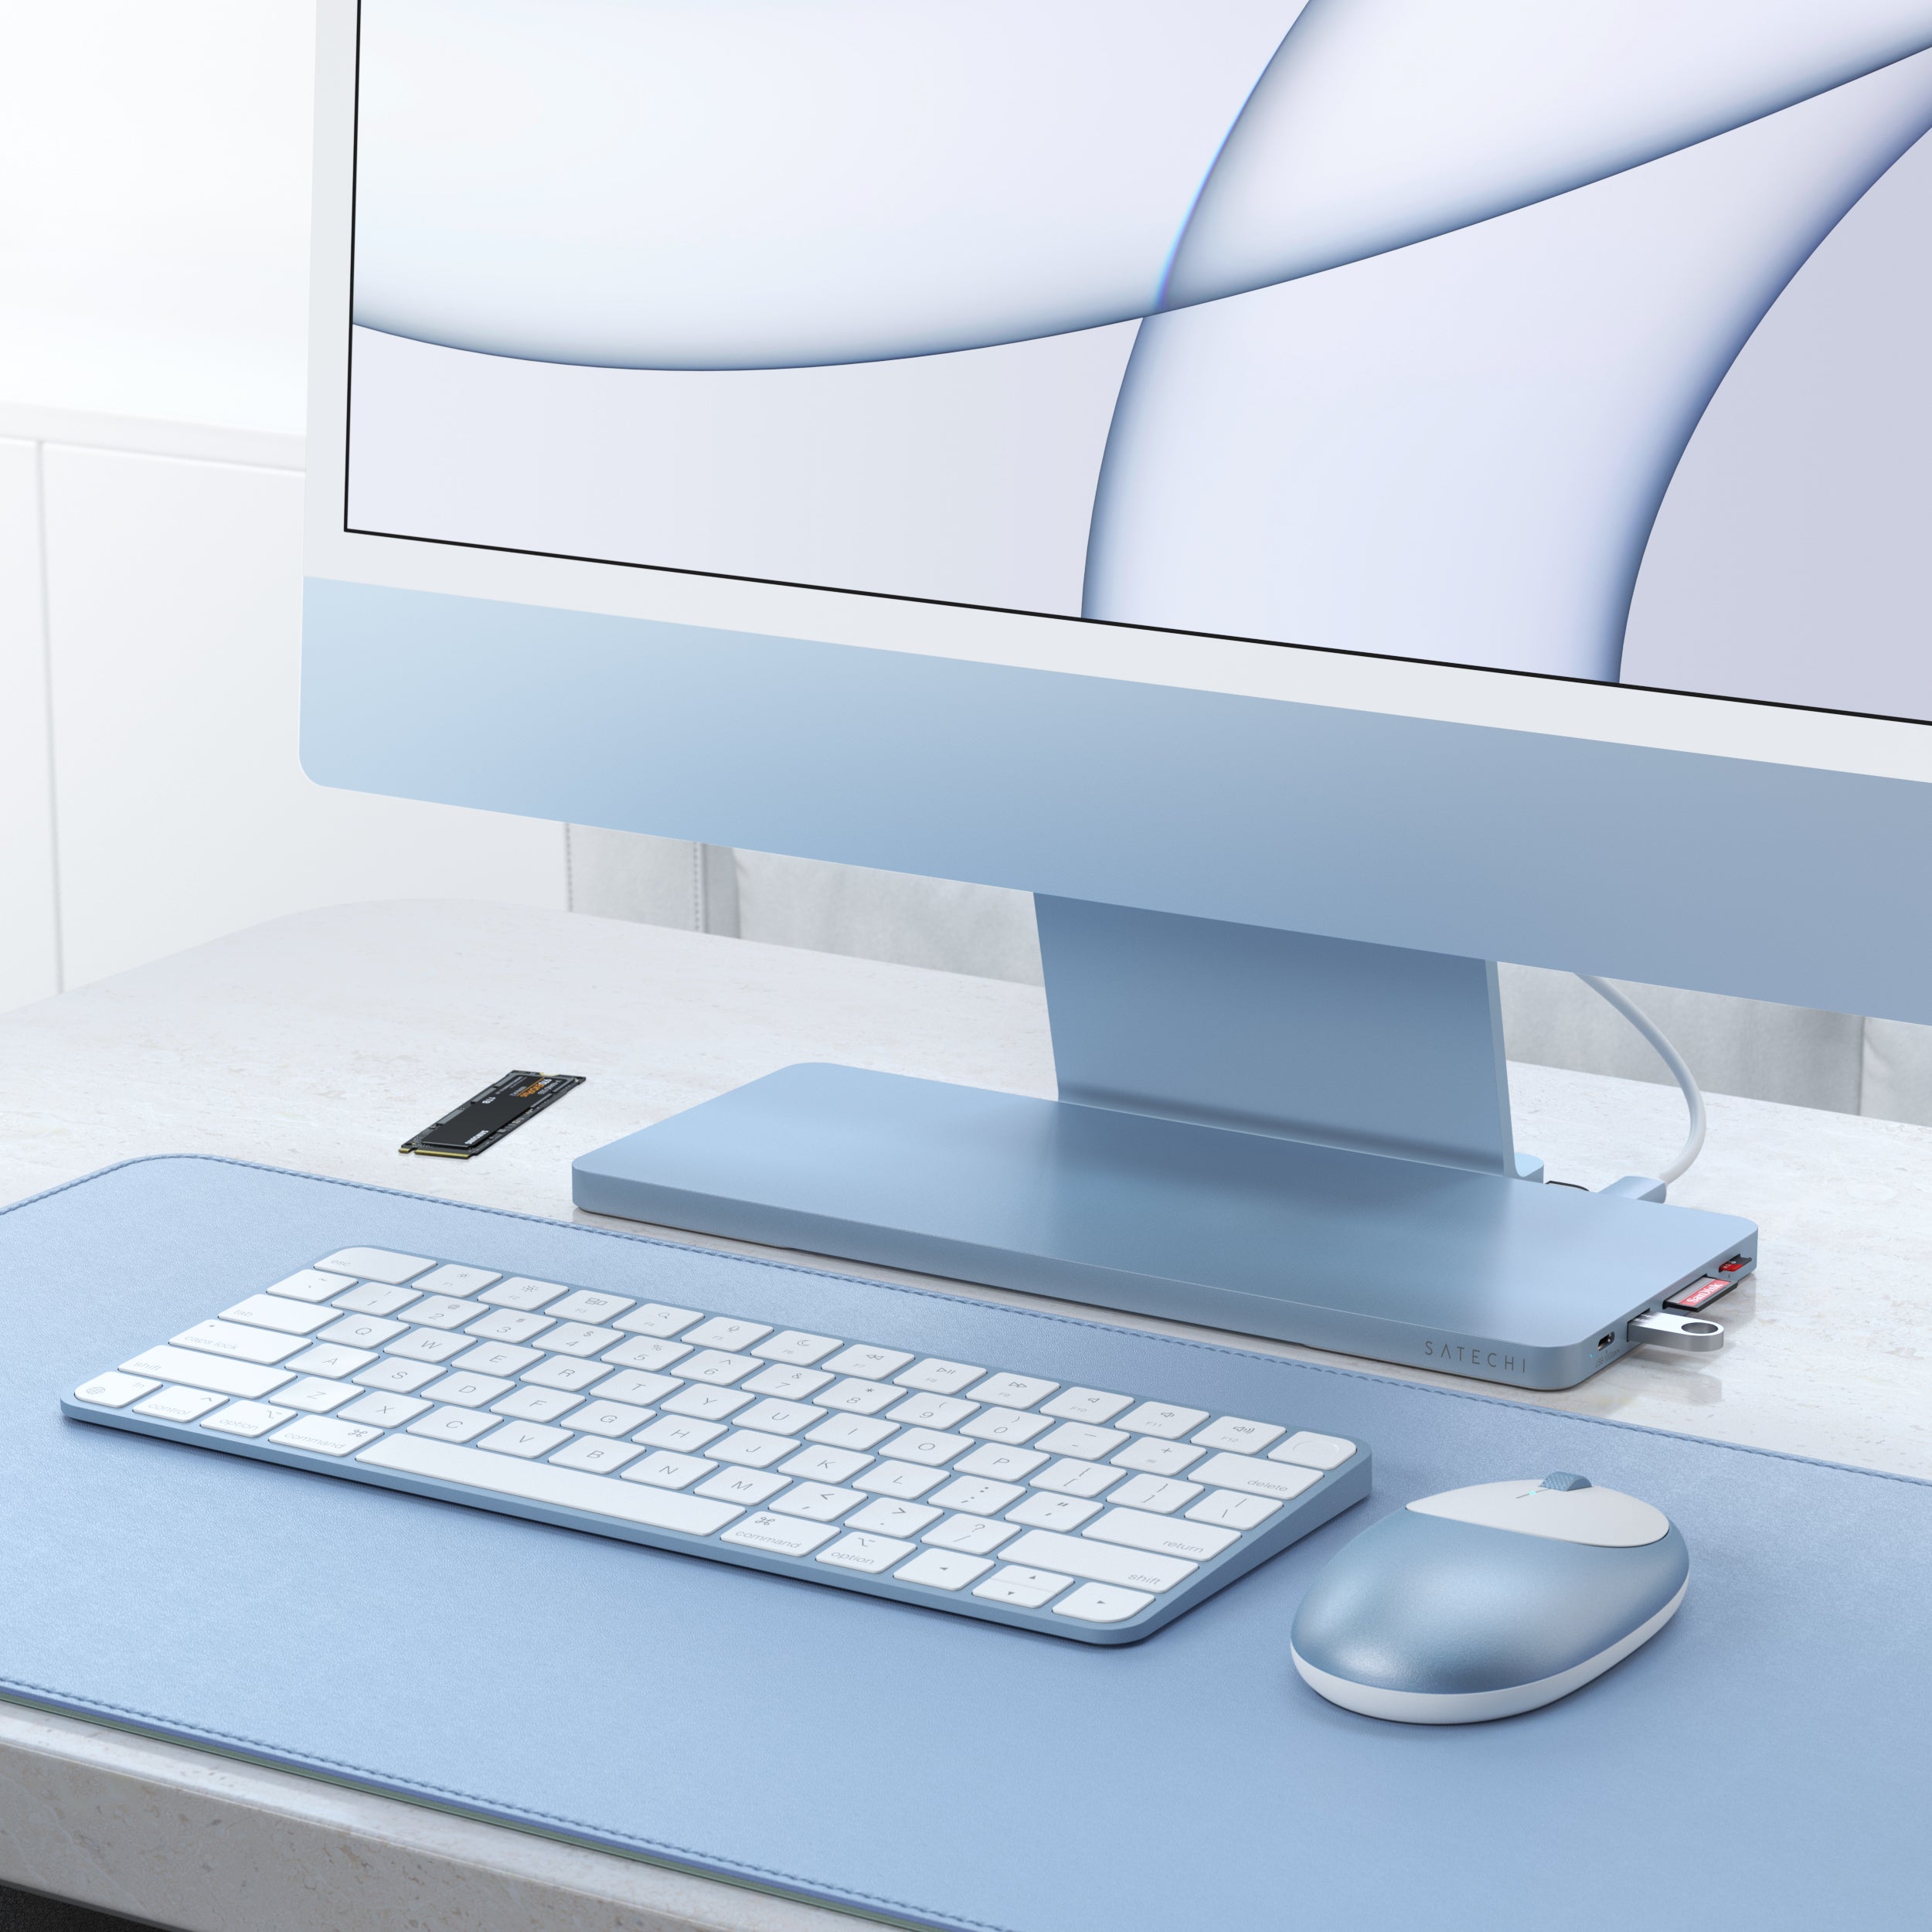 Designed to fit the 2021 iMac (24-inch) exclusively, the Satechi USB-C Slim Dock for 24” iMac provides a built-in enclosure to add external storage to your iMac and convenient access for all your most-loved ports and peripherals. Featuring a 10 Gbps USB-C data port, 10 Gbps USB-A data port, 2 x USB-A 2.0 ports, micro/SD card reader slots, and NVMe Sata Enclosure, the USB-C Slim Dock upgrades your iMac’s functionality while maintaining a sleek aesthetic all with a plug and play design.